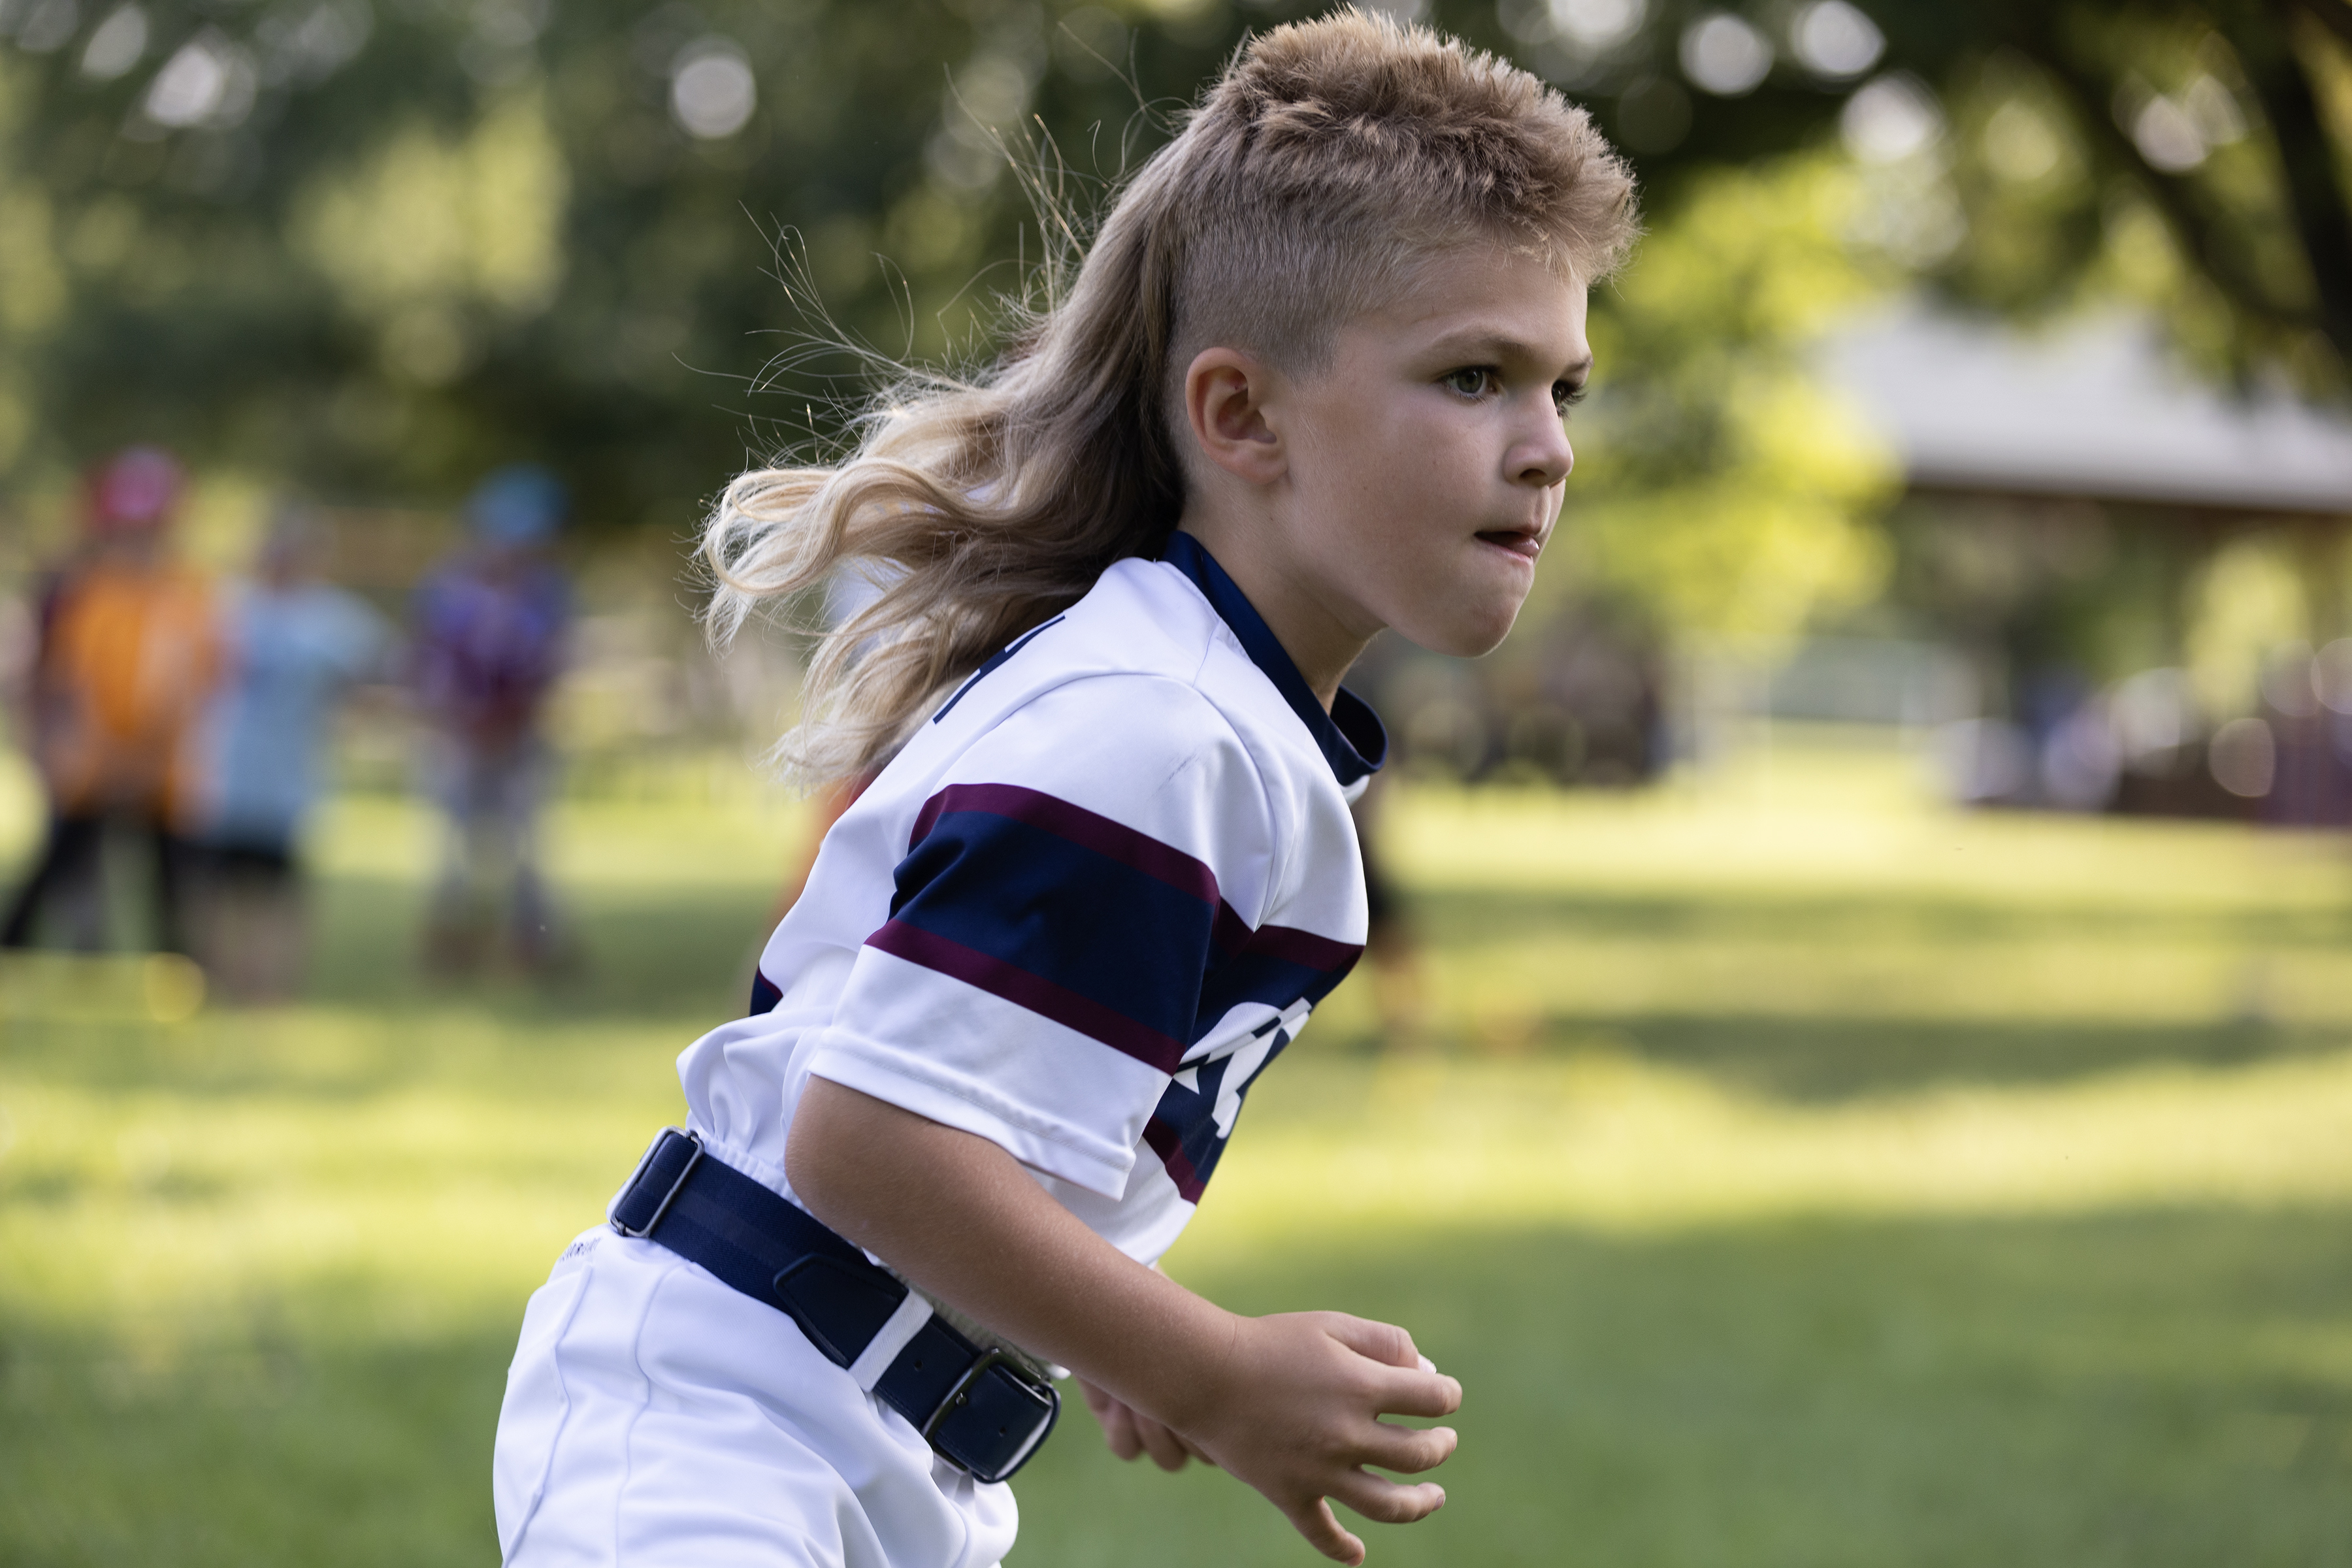 West Pottsgrove Township 6-year-old 'Cheddar Whiz' named 2023 Kids Mullet  Champion - WHYY